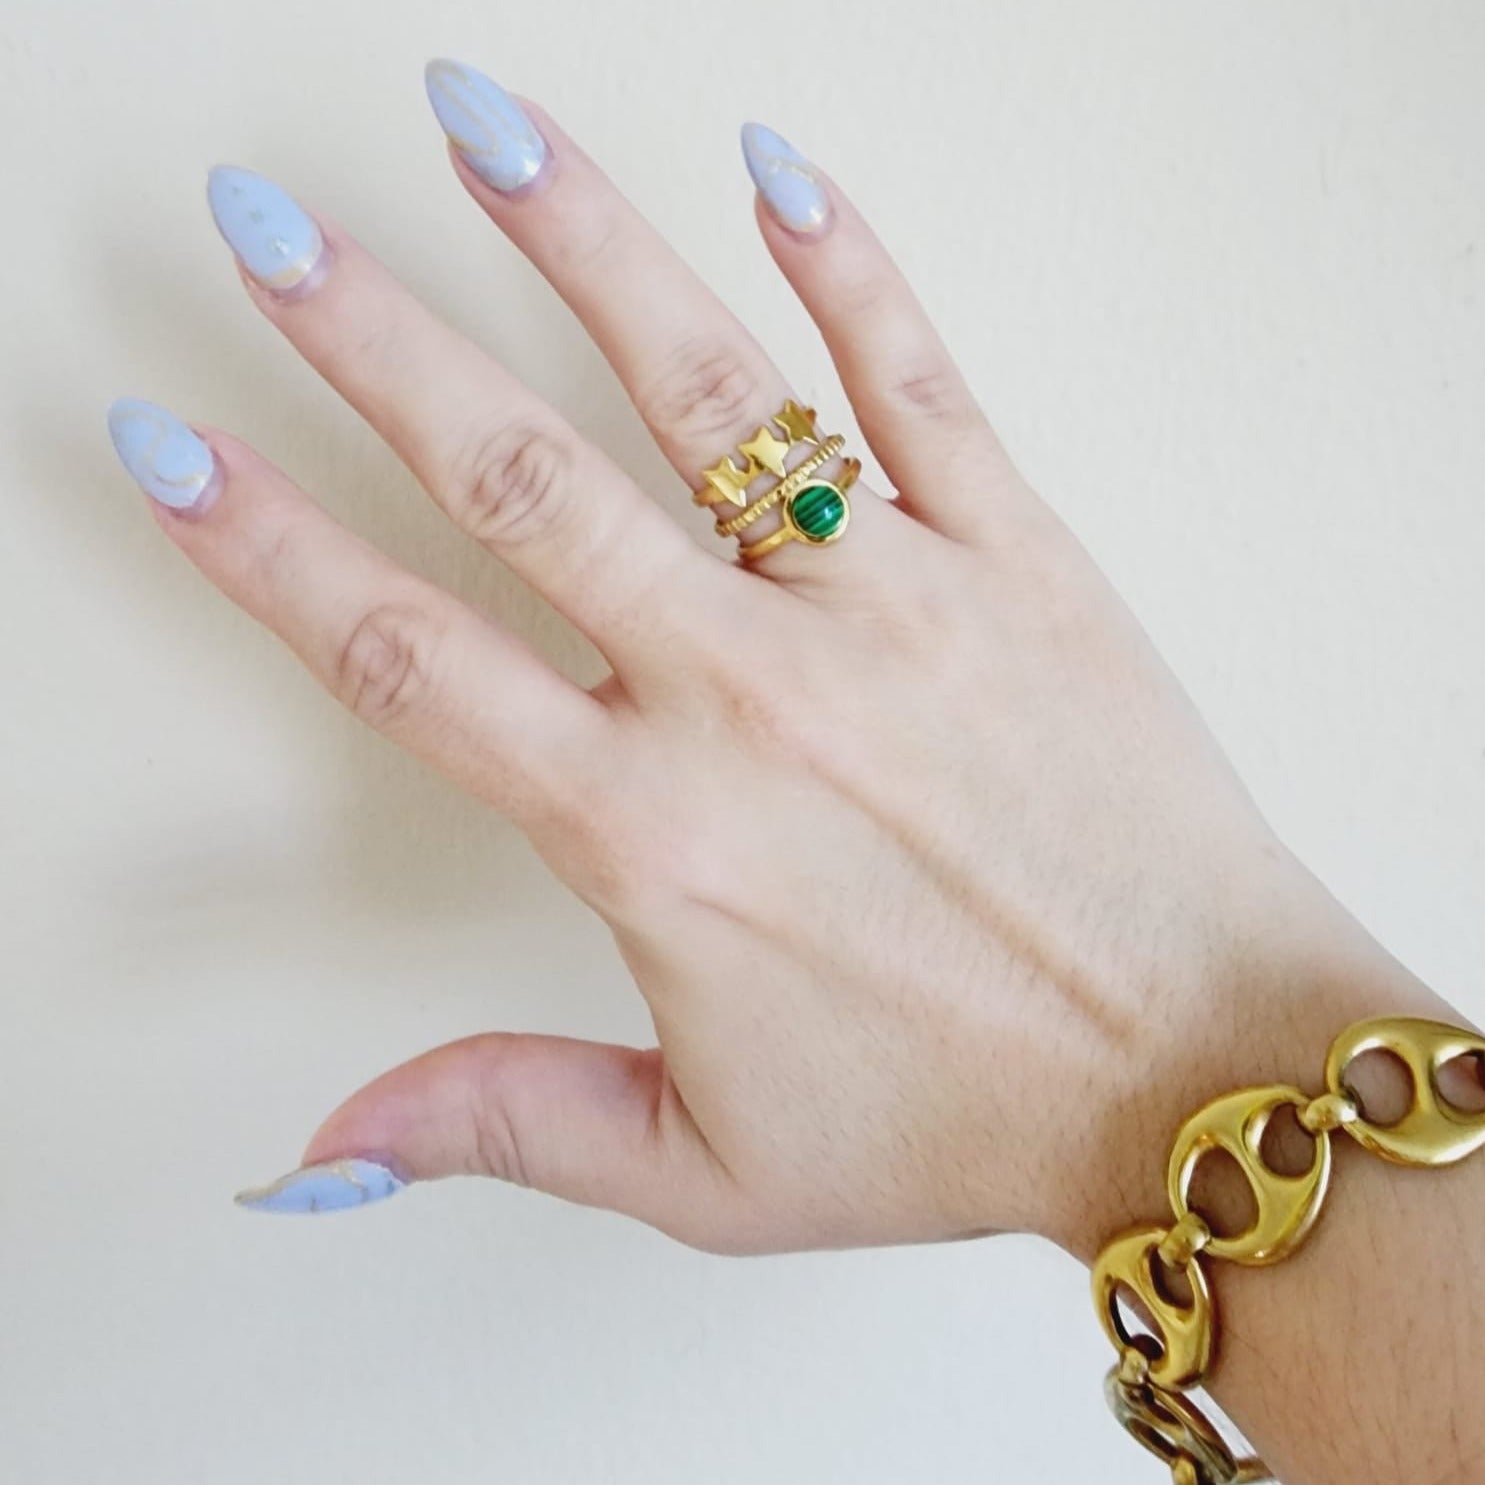 Emerald ring, Star ring, Adjustable bold ring, Adjustable Gold ring, Delicate and simple ring, chunky star ring, green gold ring, waterproof ring, hypoallergenic ring, untarnish ring, anti tarnish ring, anillo de estrellas, Water Resistant Jewelry